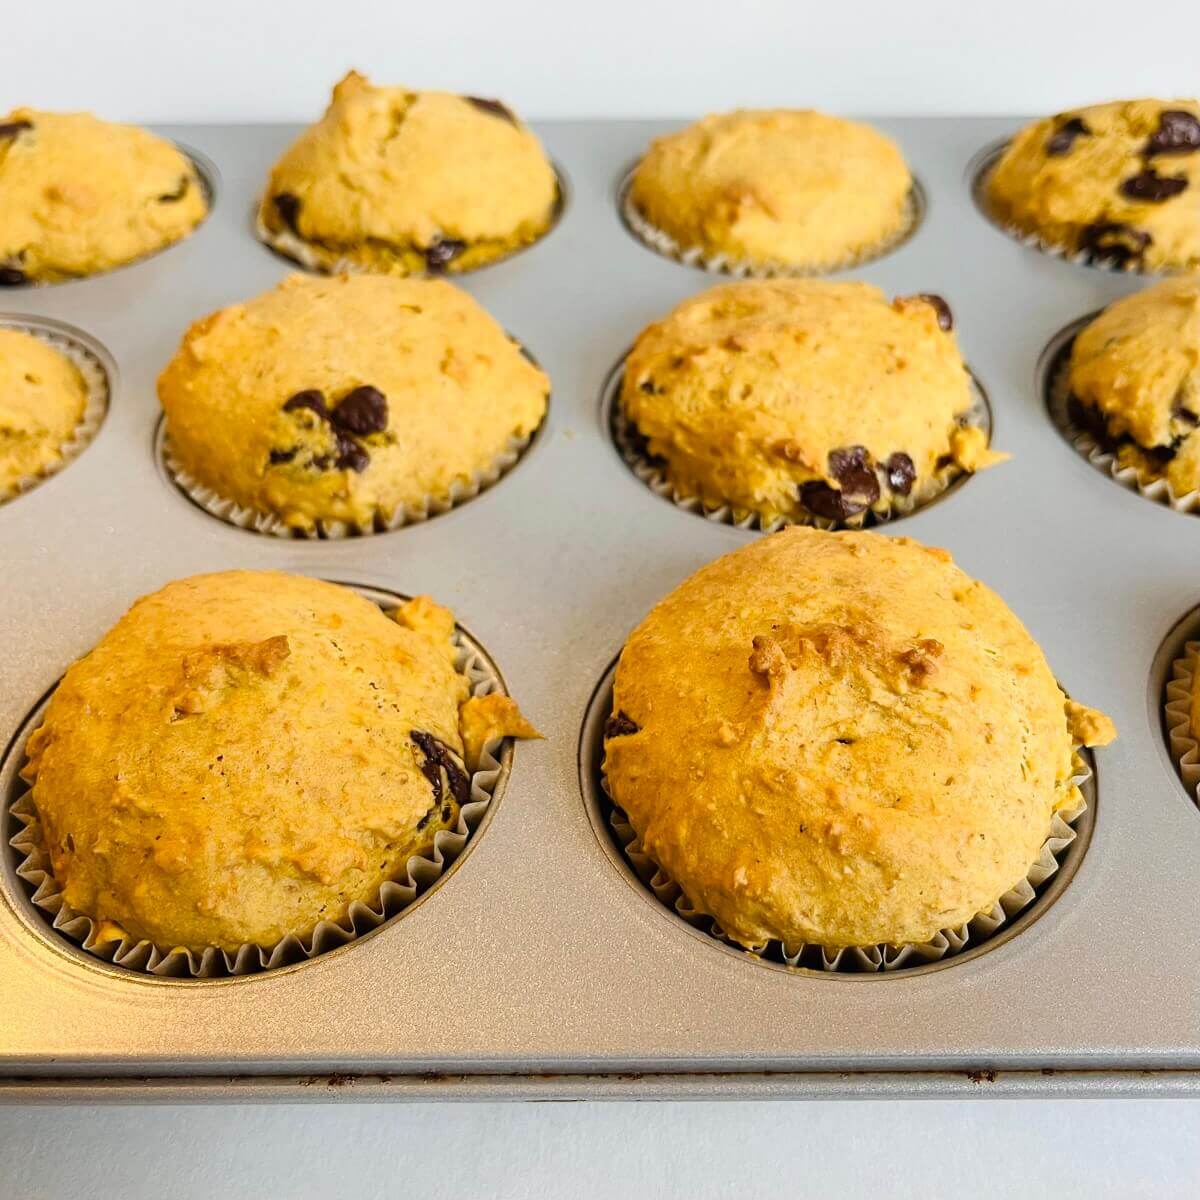 Muffins cooling in a baking pan.